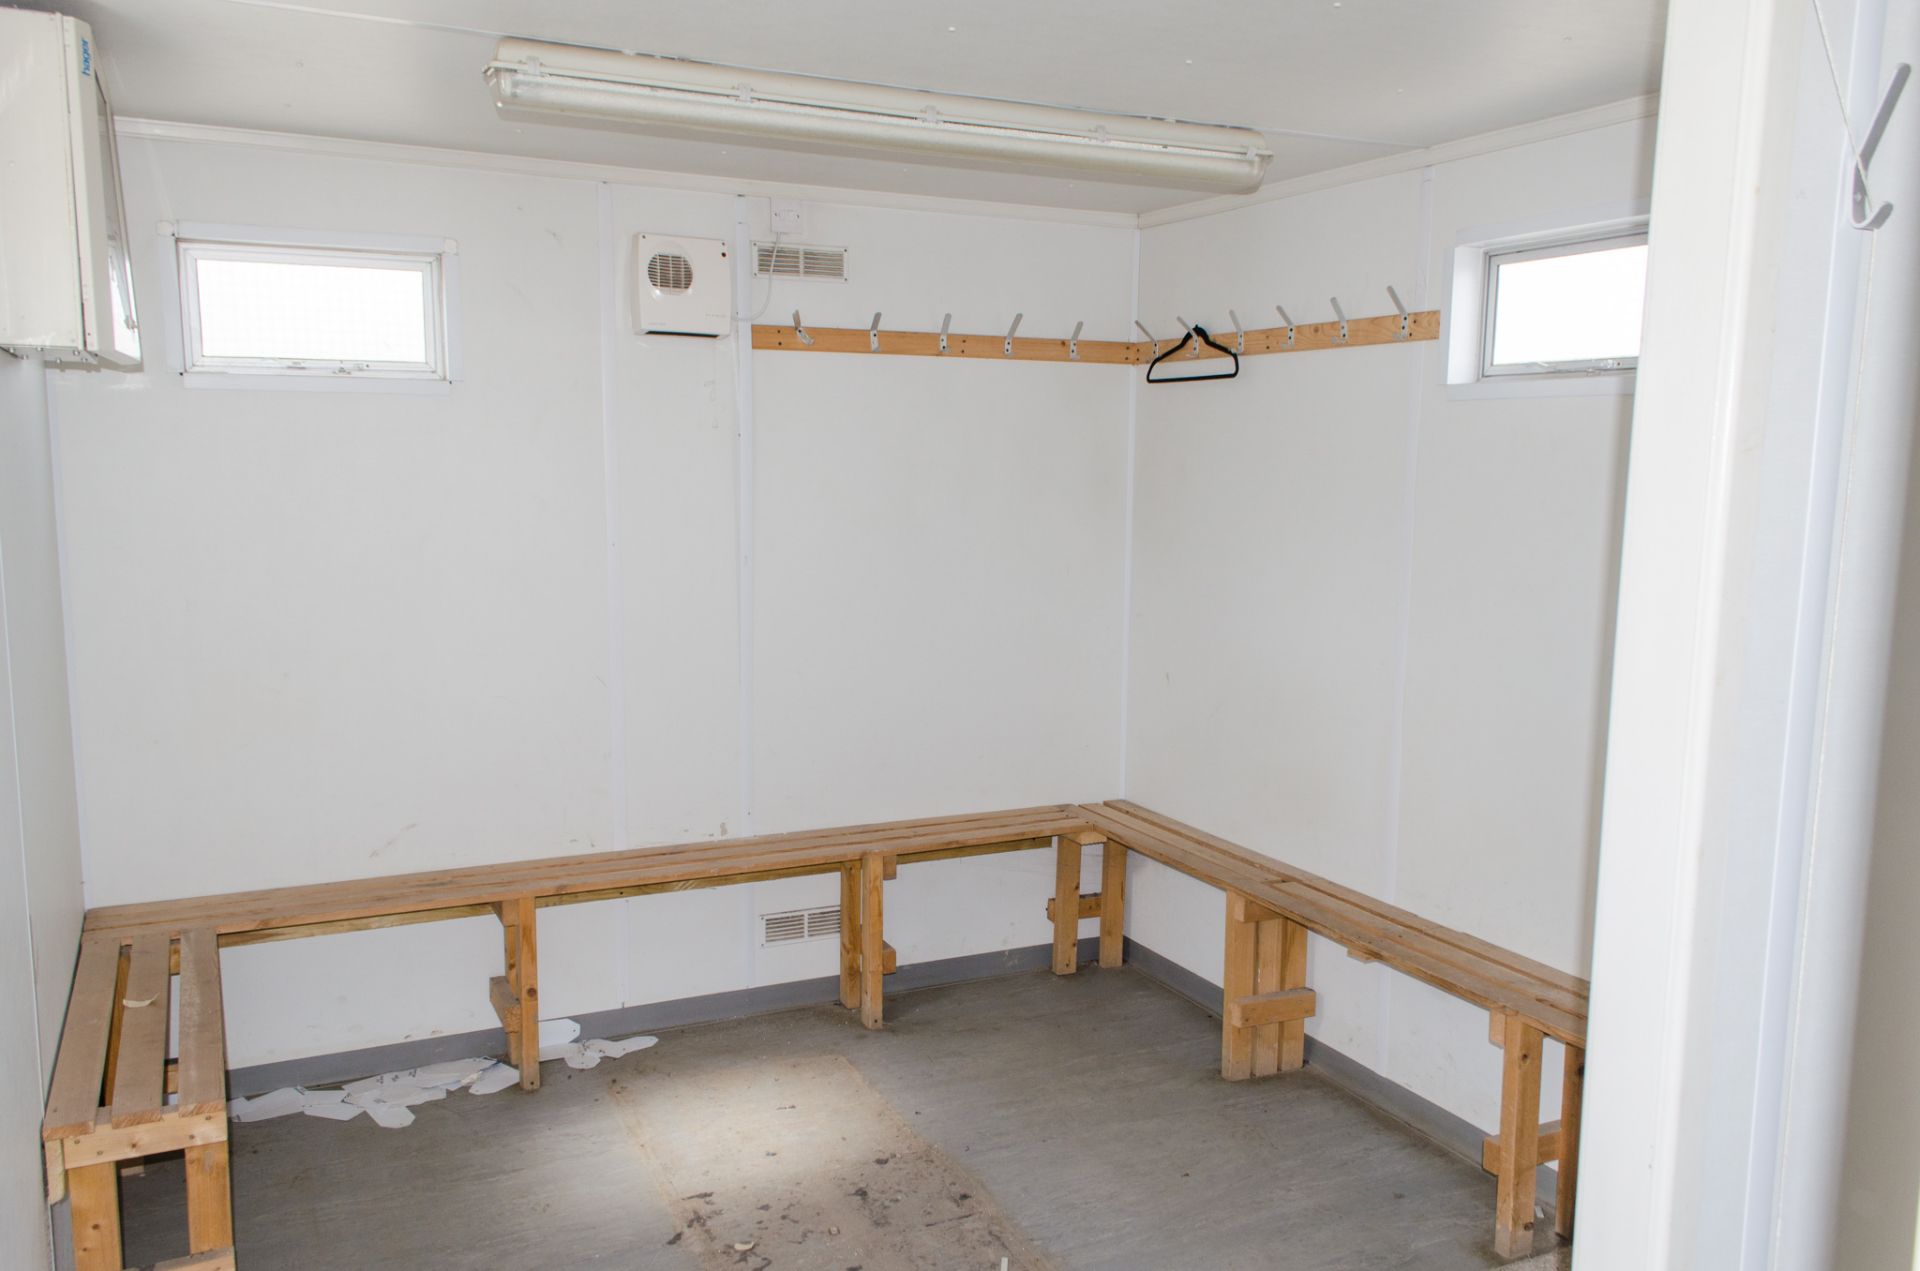 32 ft x 10 ft steel jack leg shower site unit Comprising of 8 - showers & changing area BBA1684 - Image 5 of 14